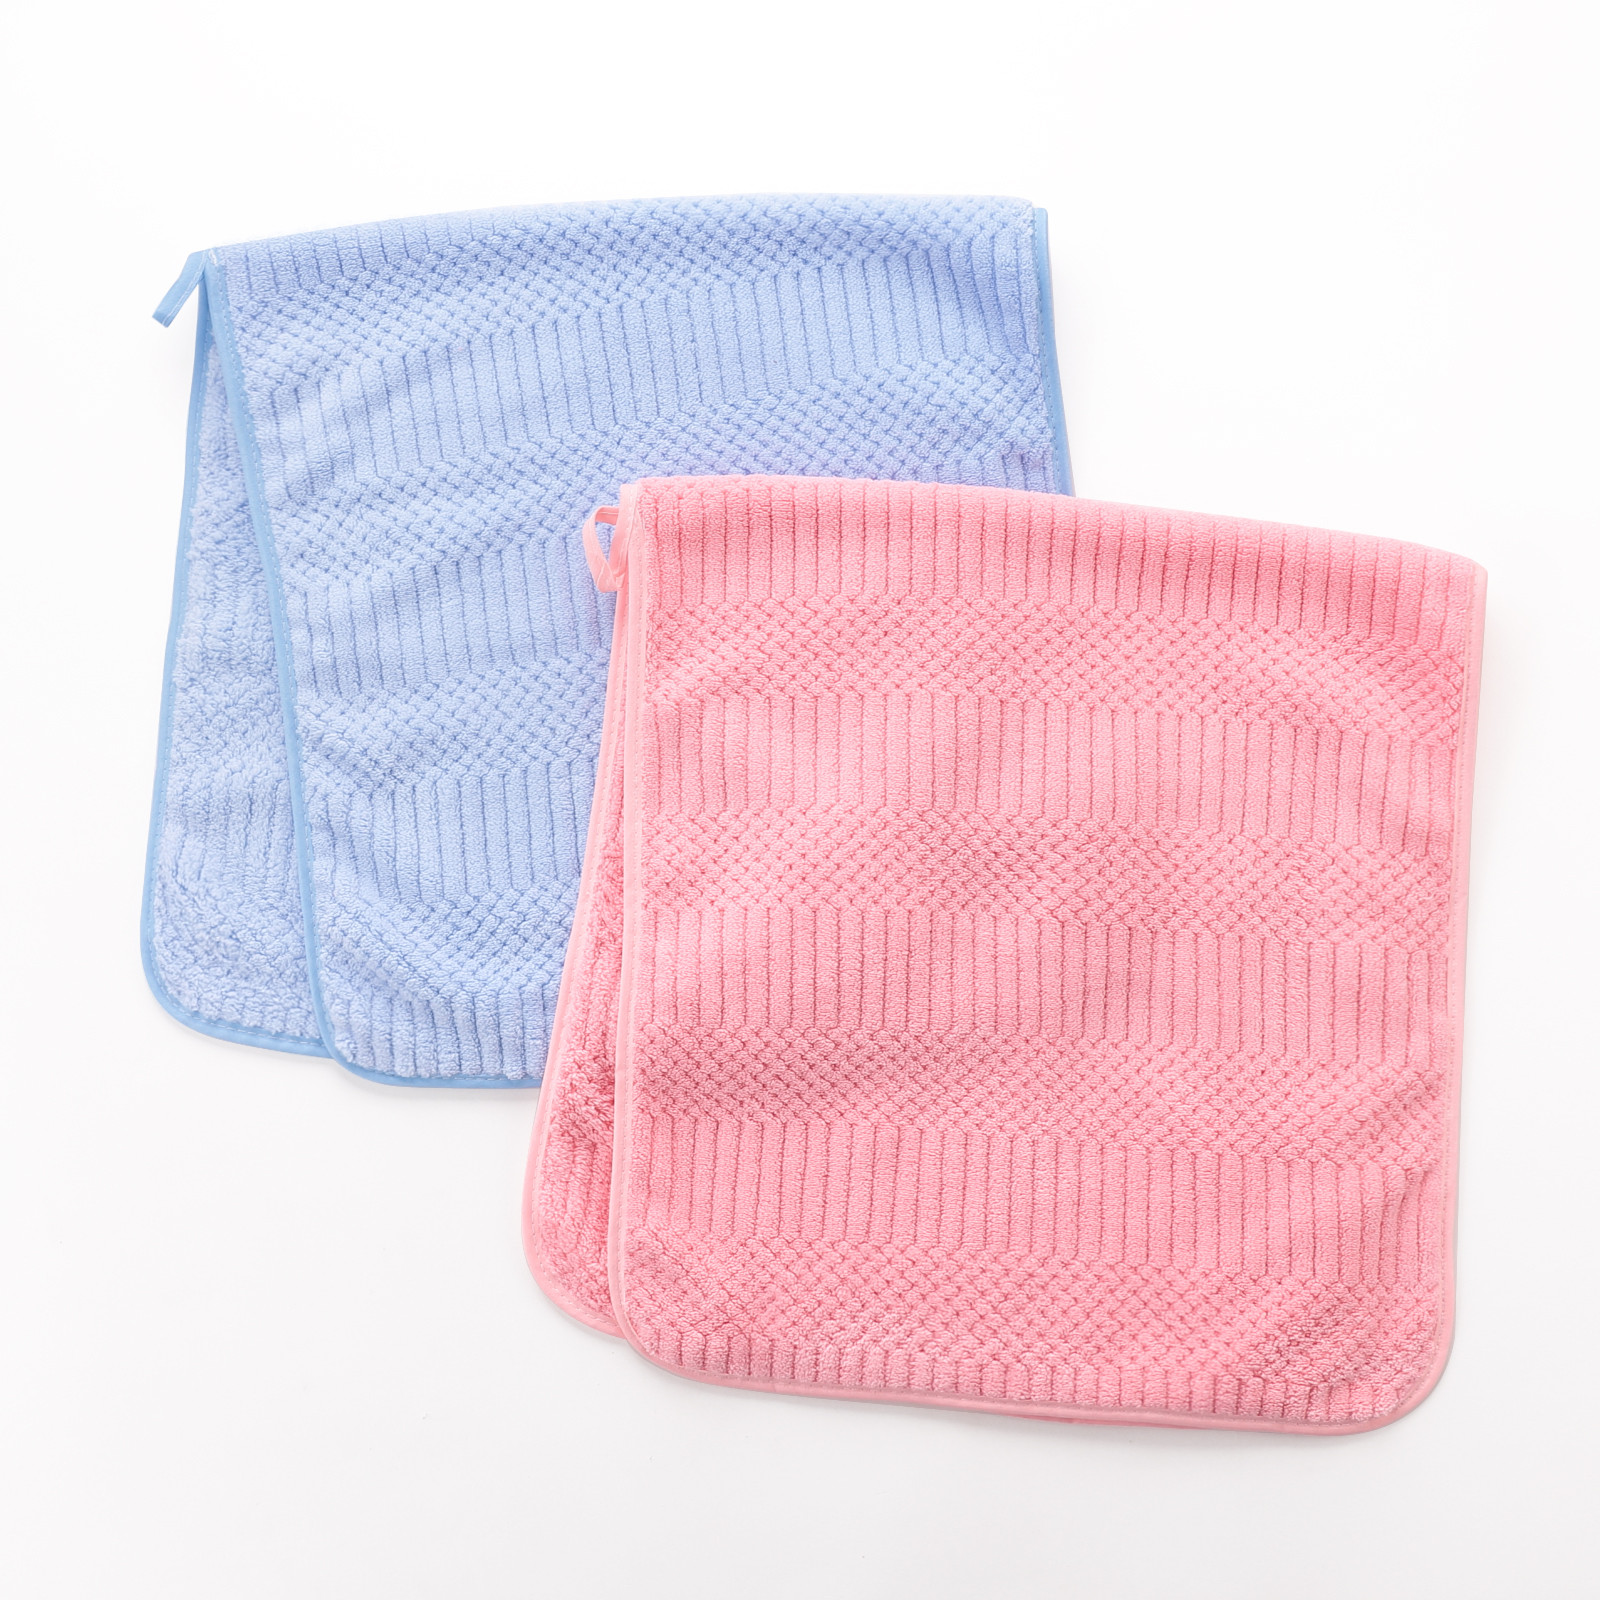 Kuber Industries 2 Piece Hand Towel Set|280 GSM|Gtm & Workout Towels|Super Absorbent & Antibacterial Treatment|Small Size, Travel Friendly  (Blue & Pink)